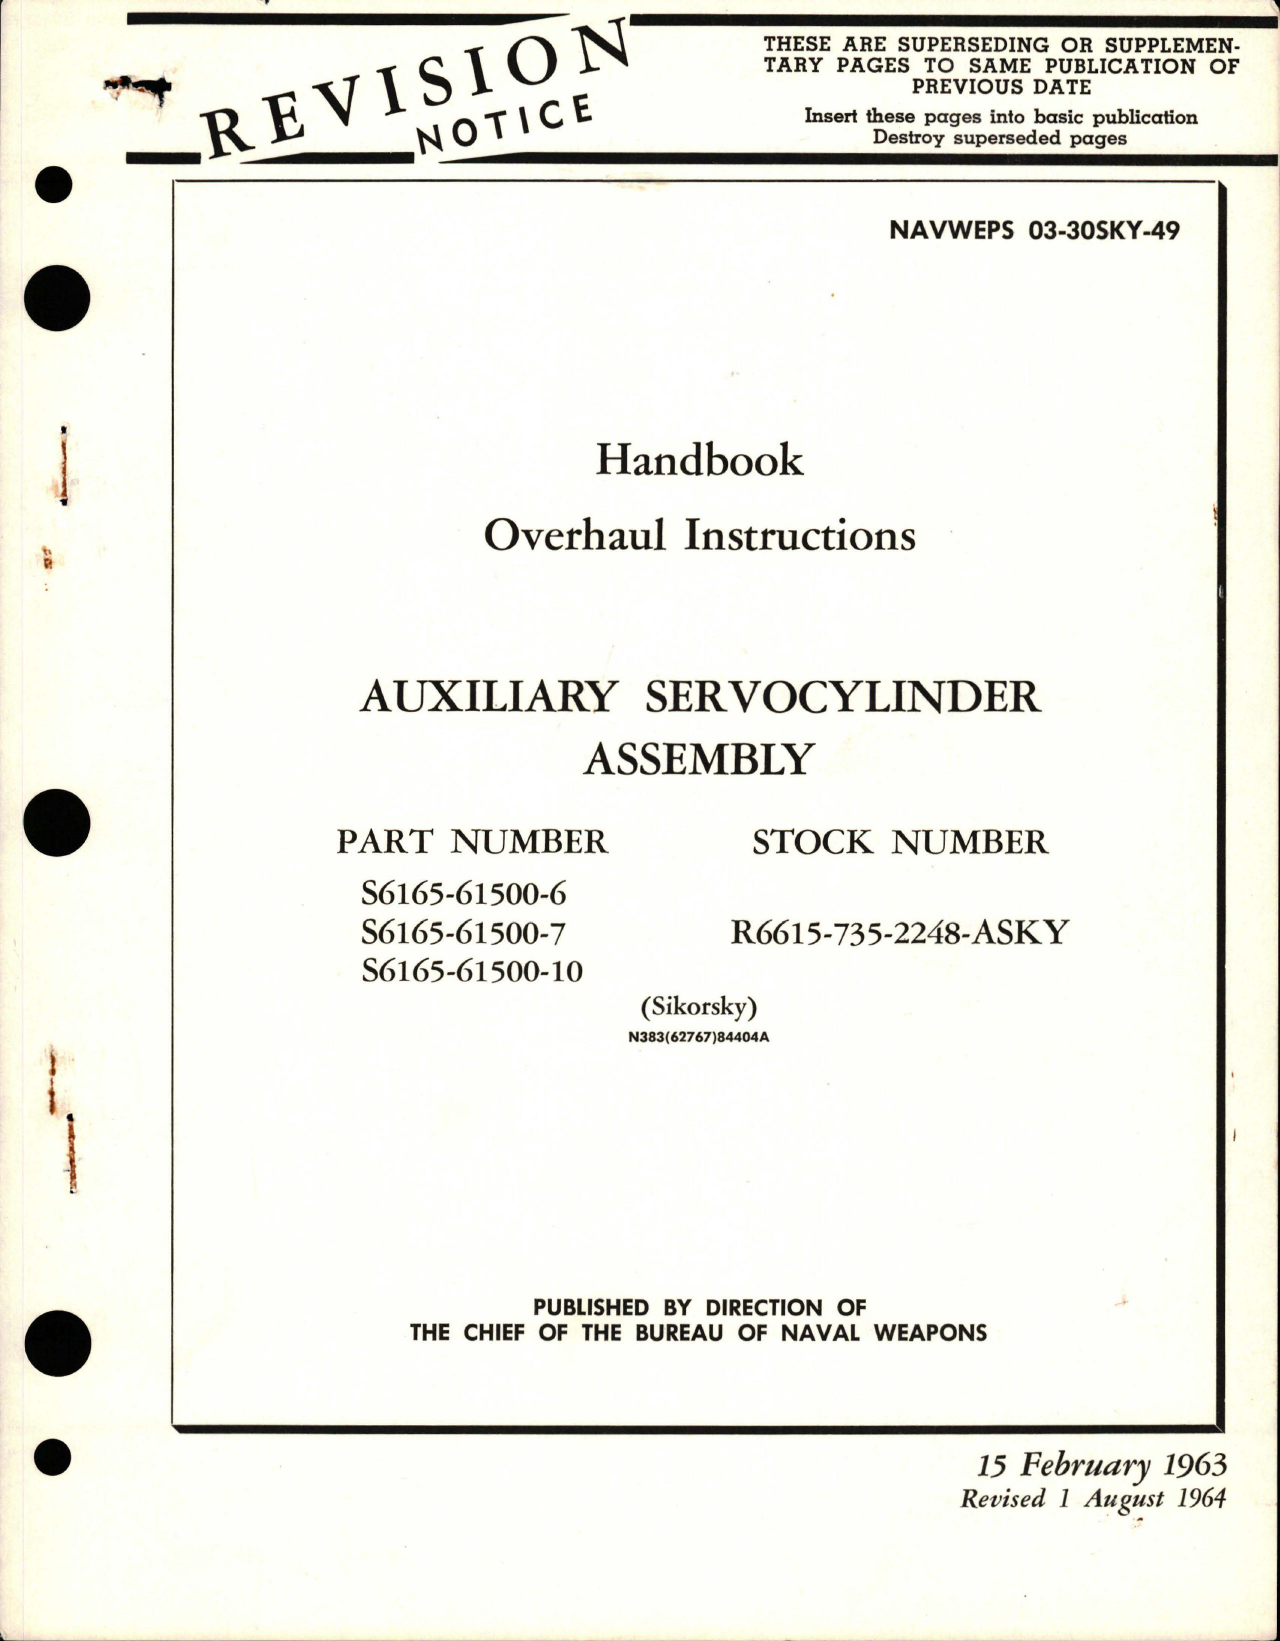 Sample page 1 from AirCorps Library document: Overhaul Instructions for Auxiliary Servocylinder Assembly - Parts S6165-61500-6, S6165-61500-7, and S6165-61500-10